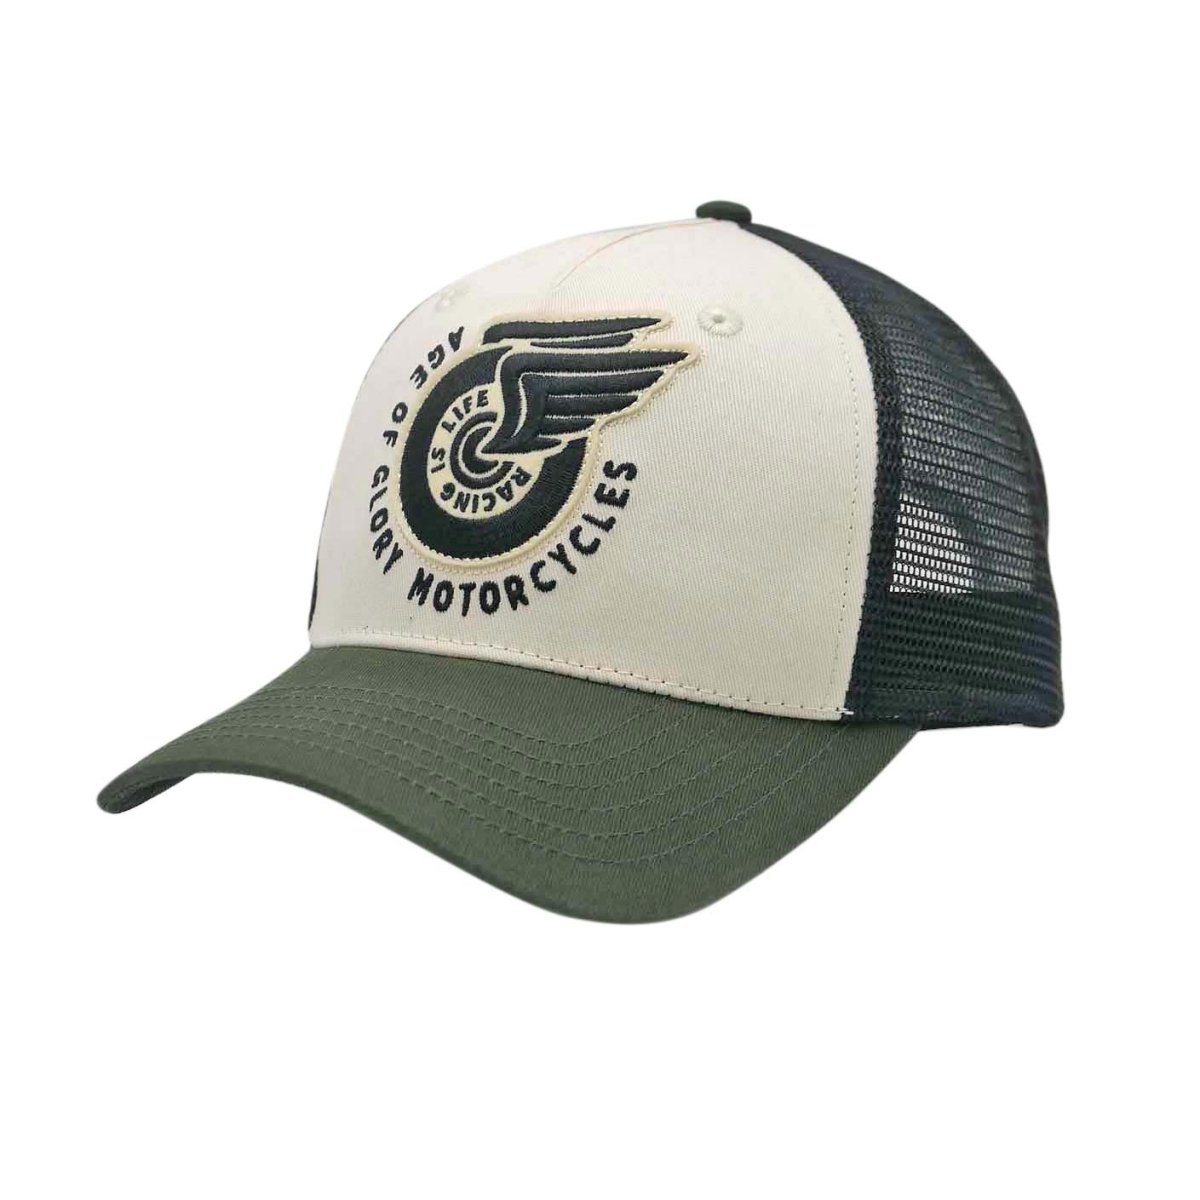 Age of Glory Champ Trucker Cap in White, Green and Black 